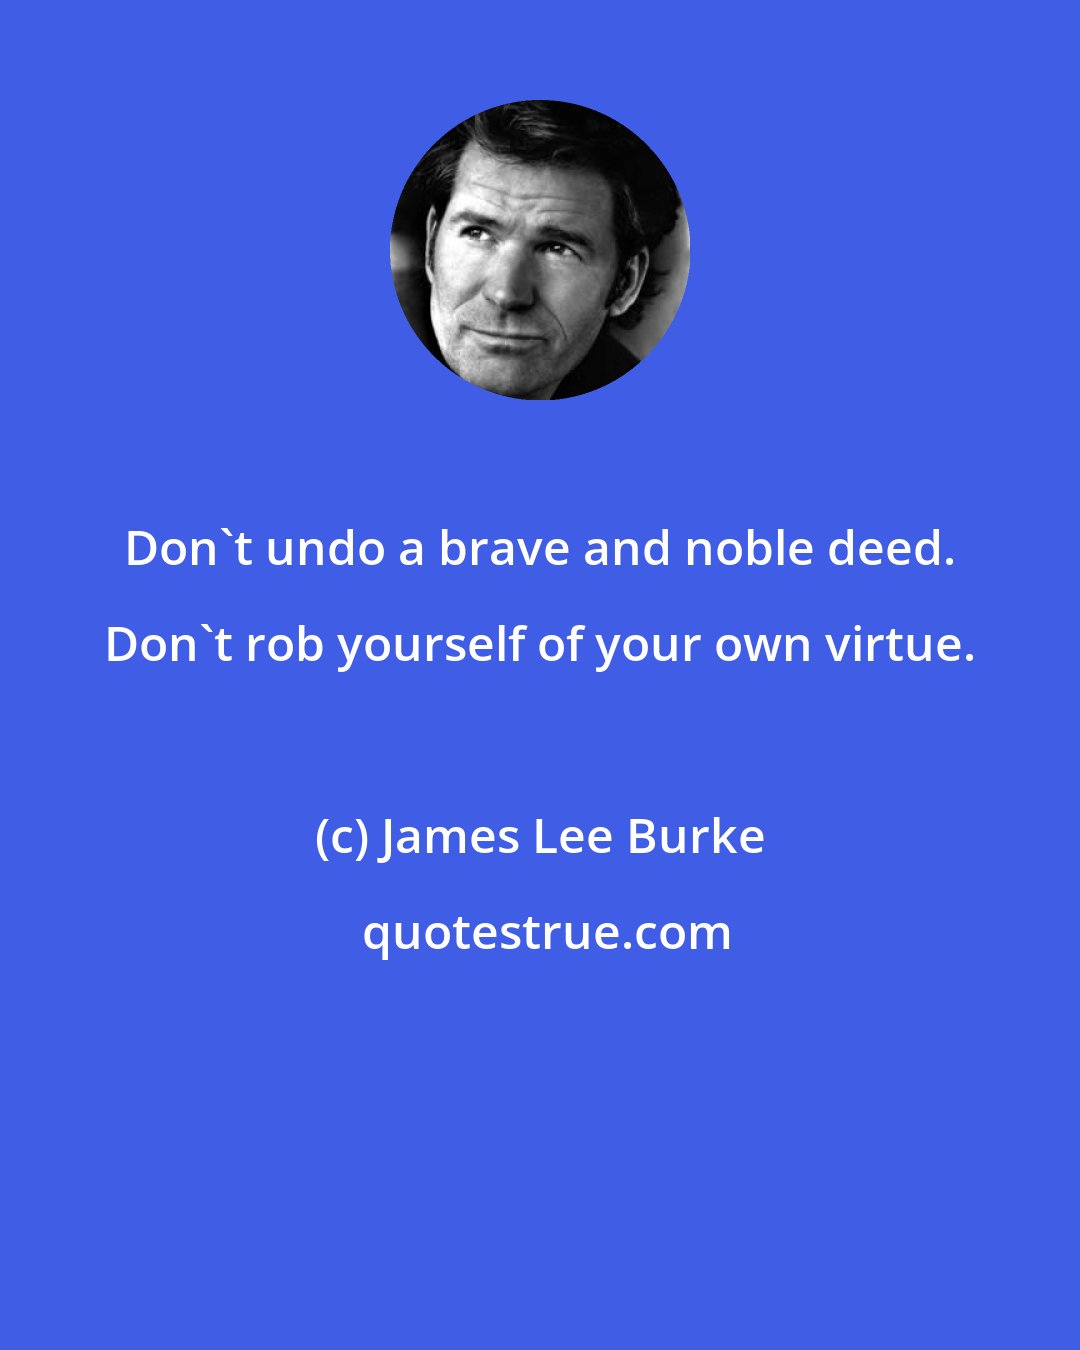 James Lee Burke: Don't undo a brave and noble deed. Don't rob yourself of your own virtue.